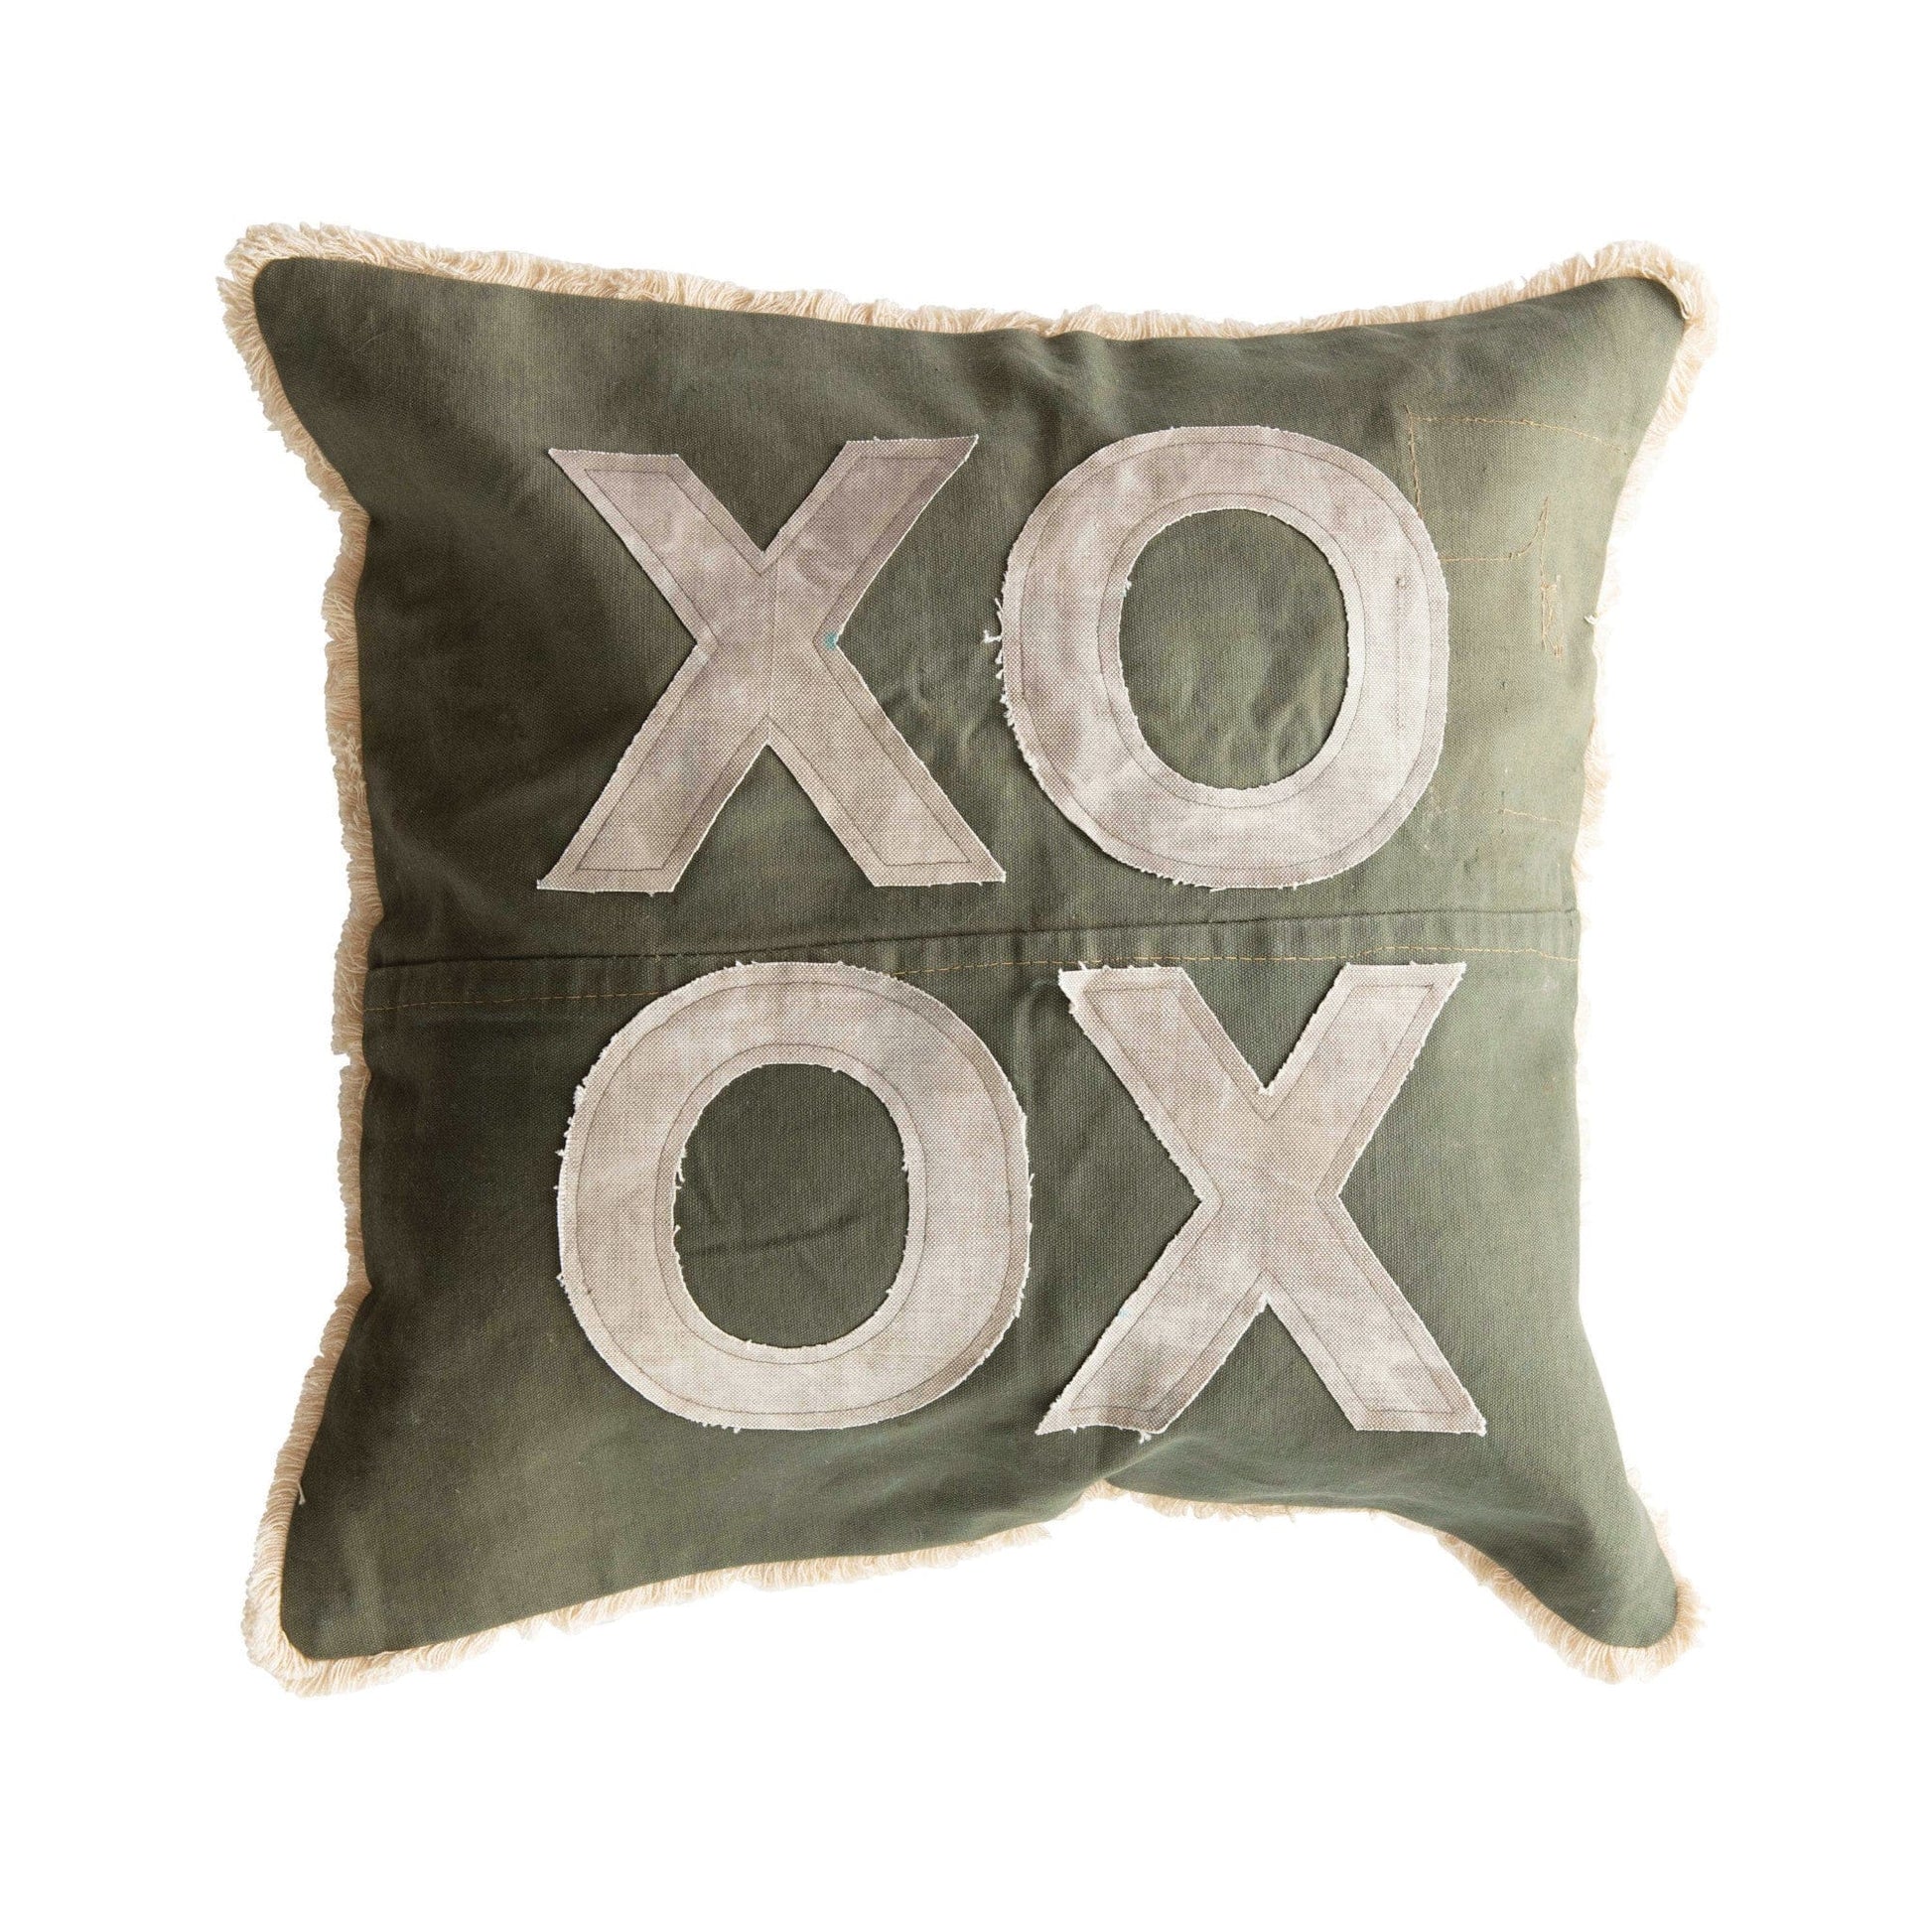 XO Pillow with Applique and Eyelash Fringe - Five and Divine